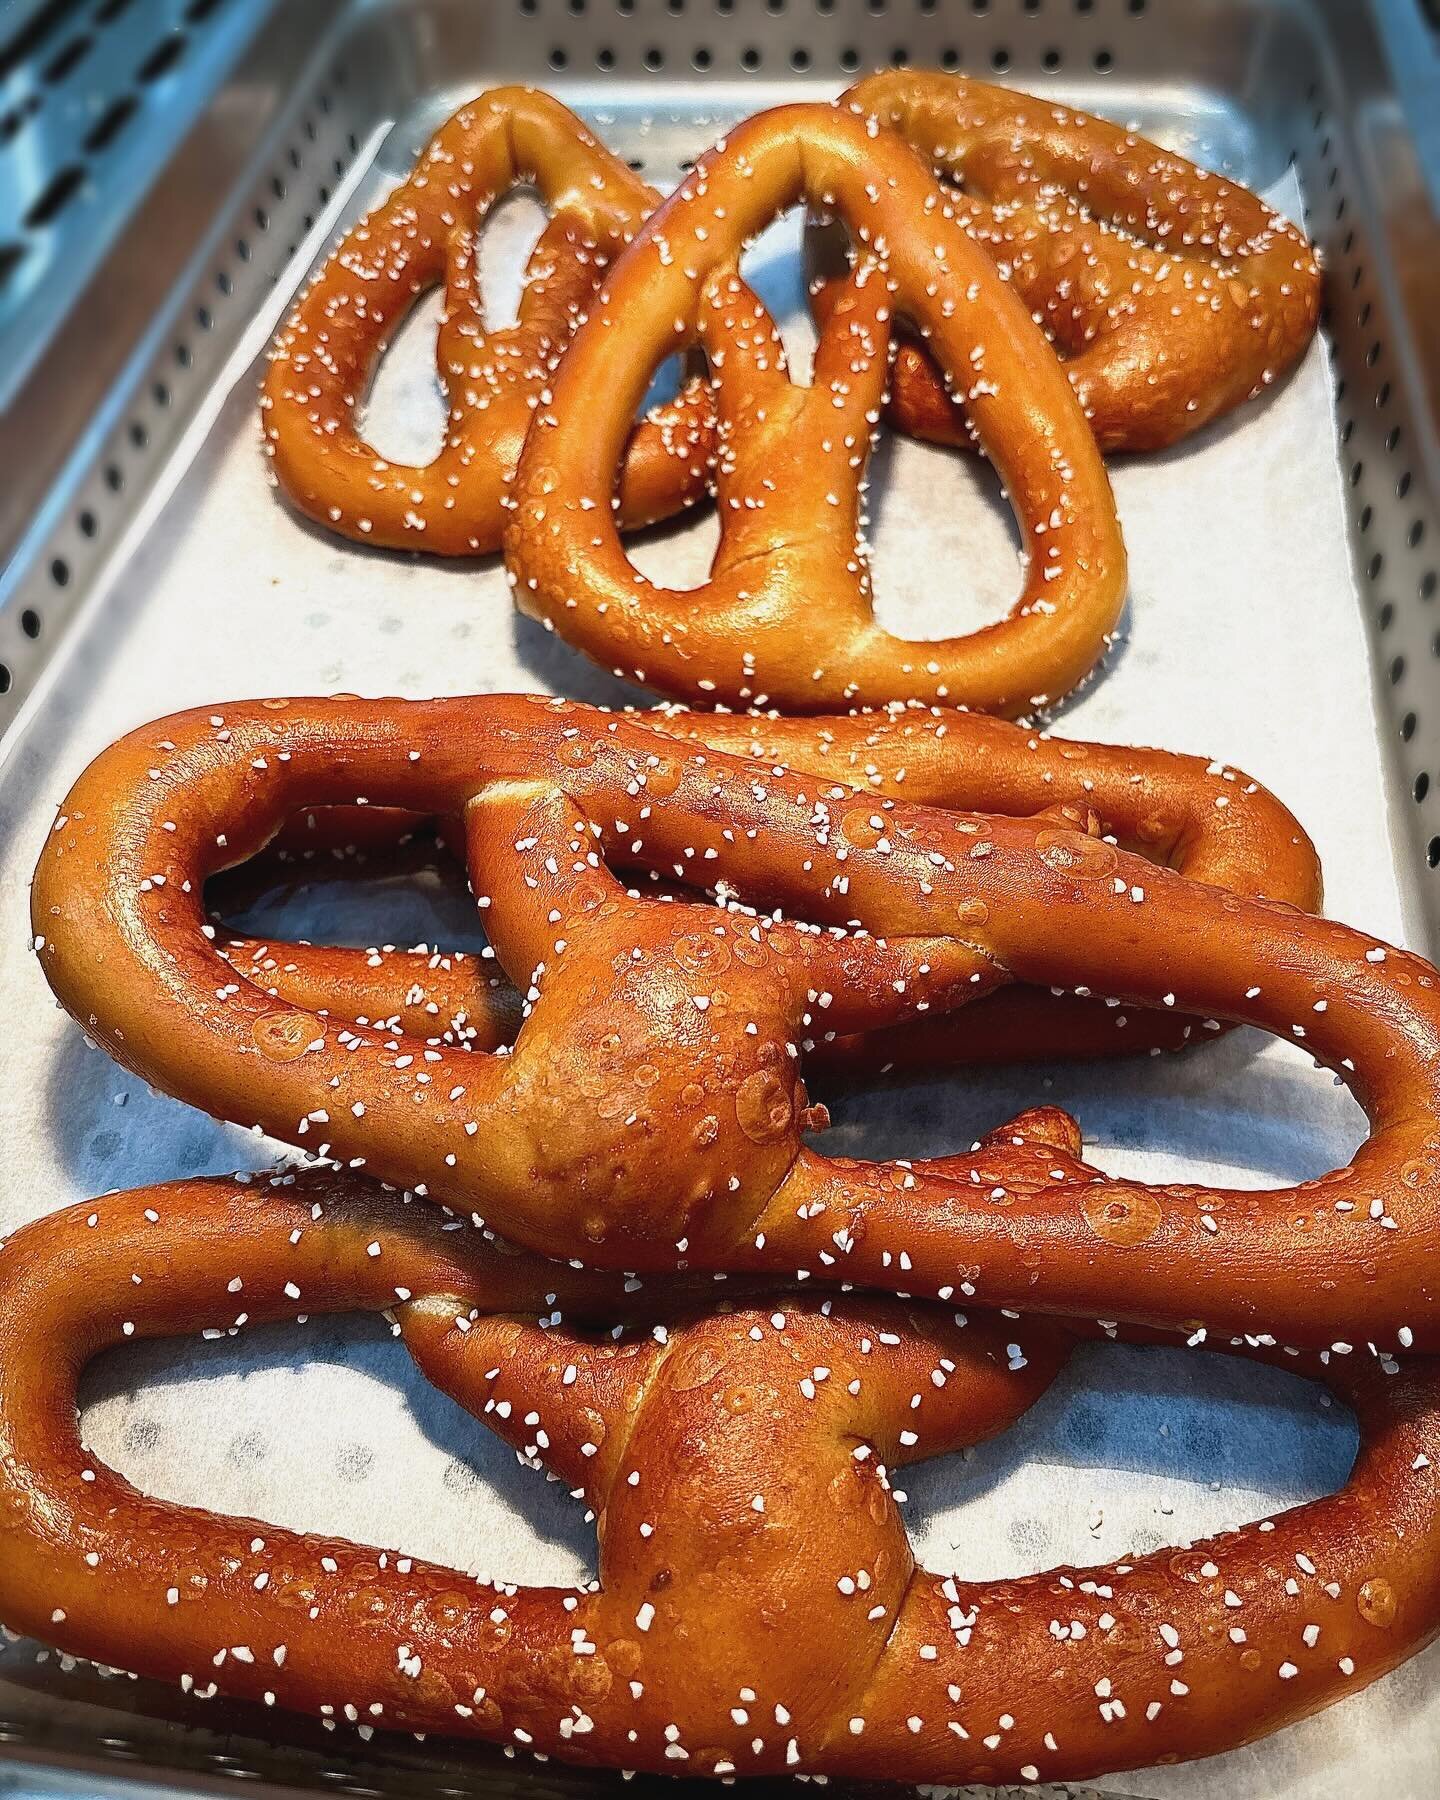 !We&rsquo;ve got touchdown- worthy pretzels! 🏈
Order pretzel nuggets or pretzels as your game day snack for the Super Bowl, this Sunday February 11th! We are taking orders until the 9th!! 🏟️ ✨🥨
.
.
.
Todays hours: 11am-7pm 

#btx #superbowl #cheif